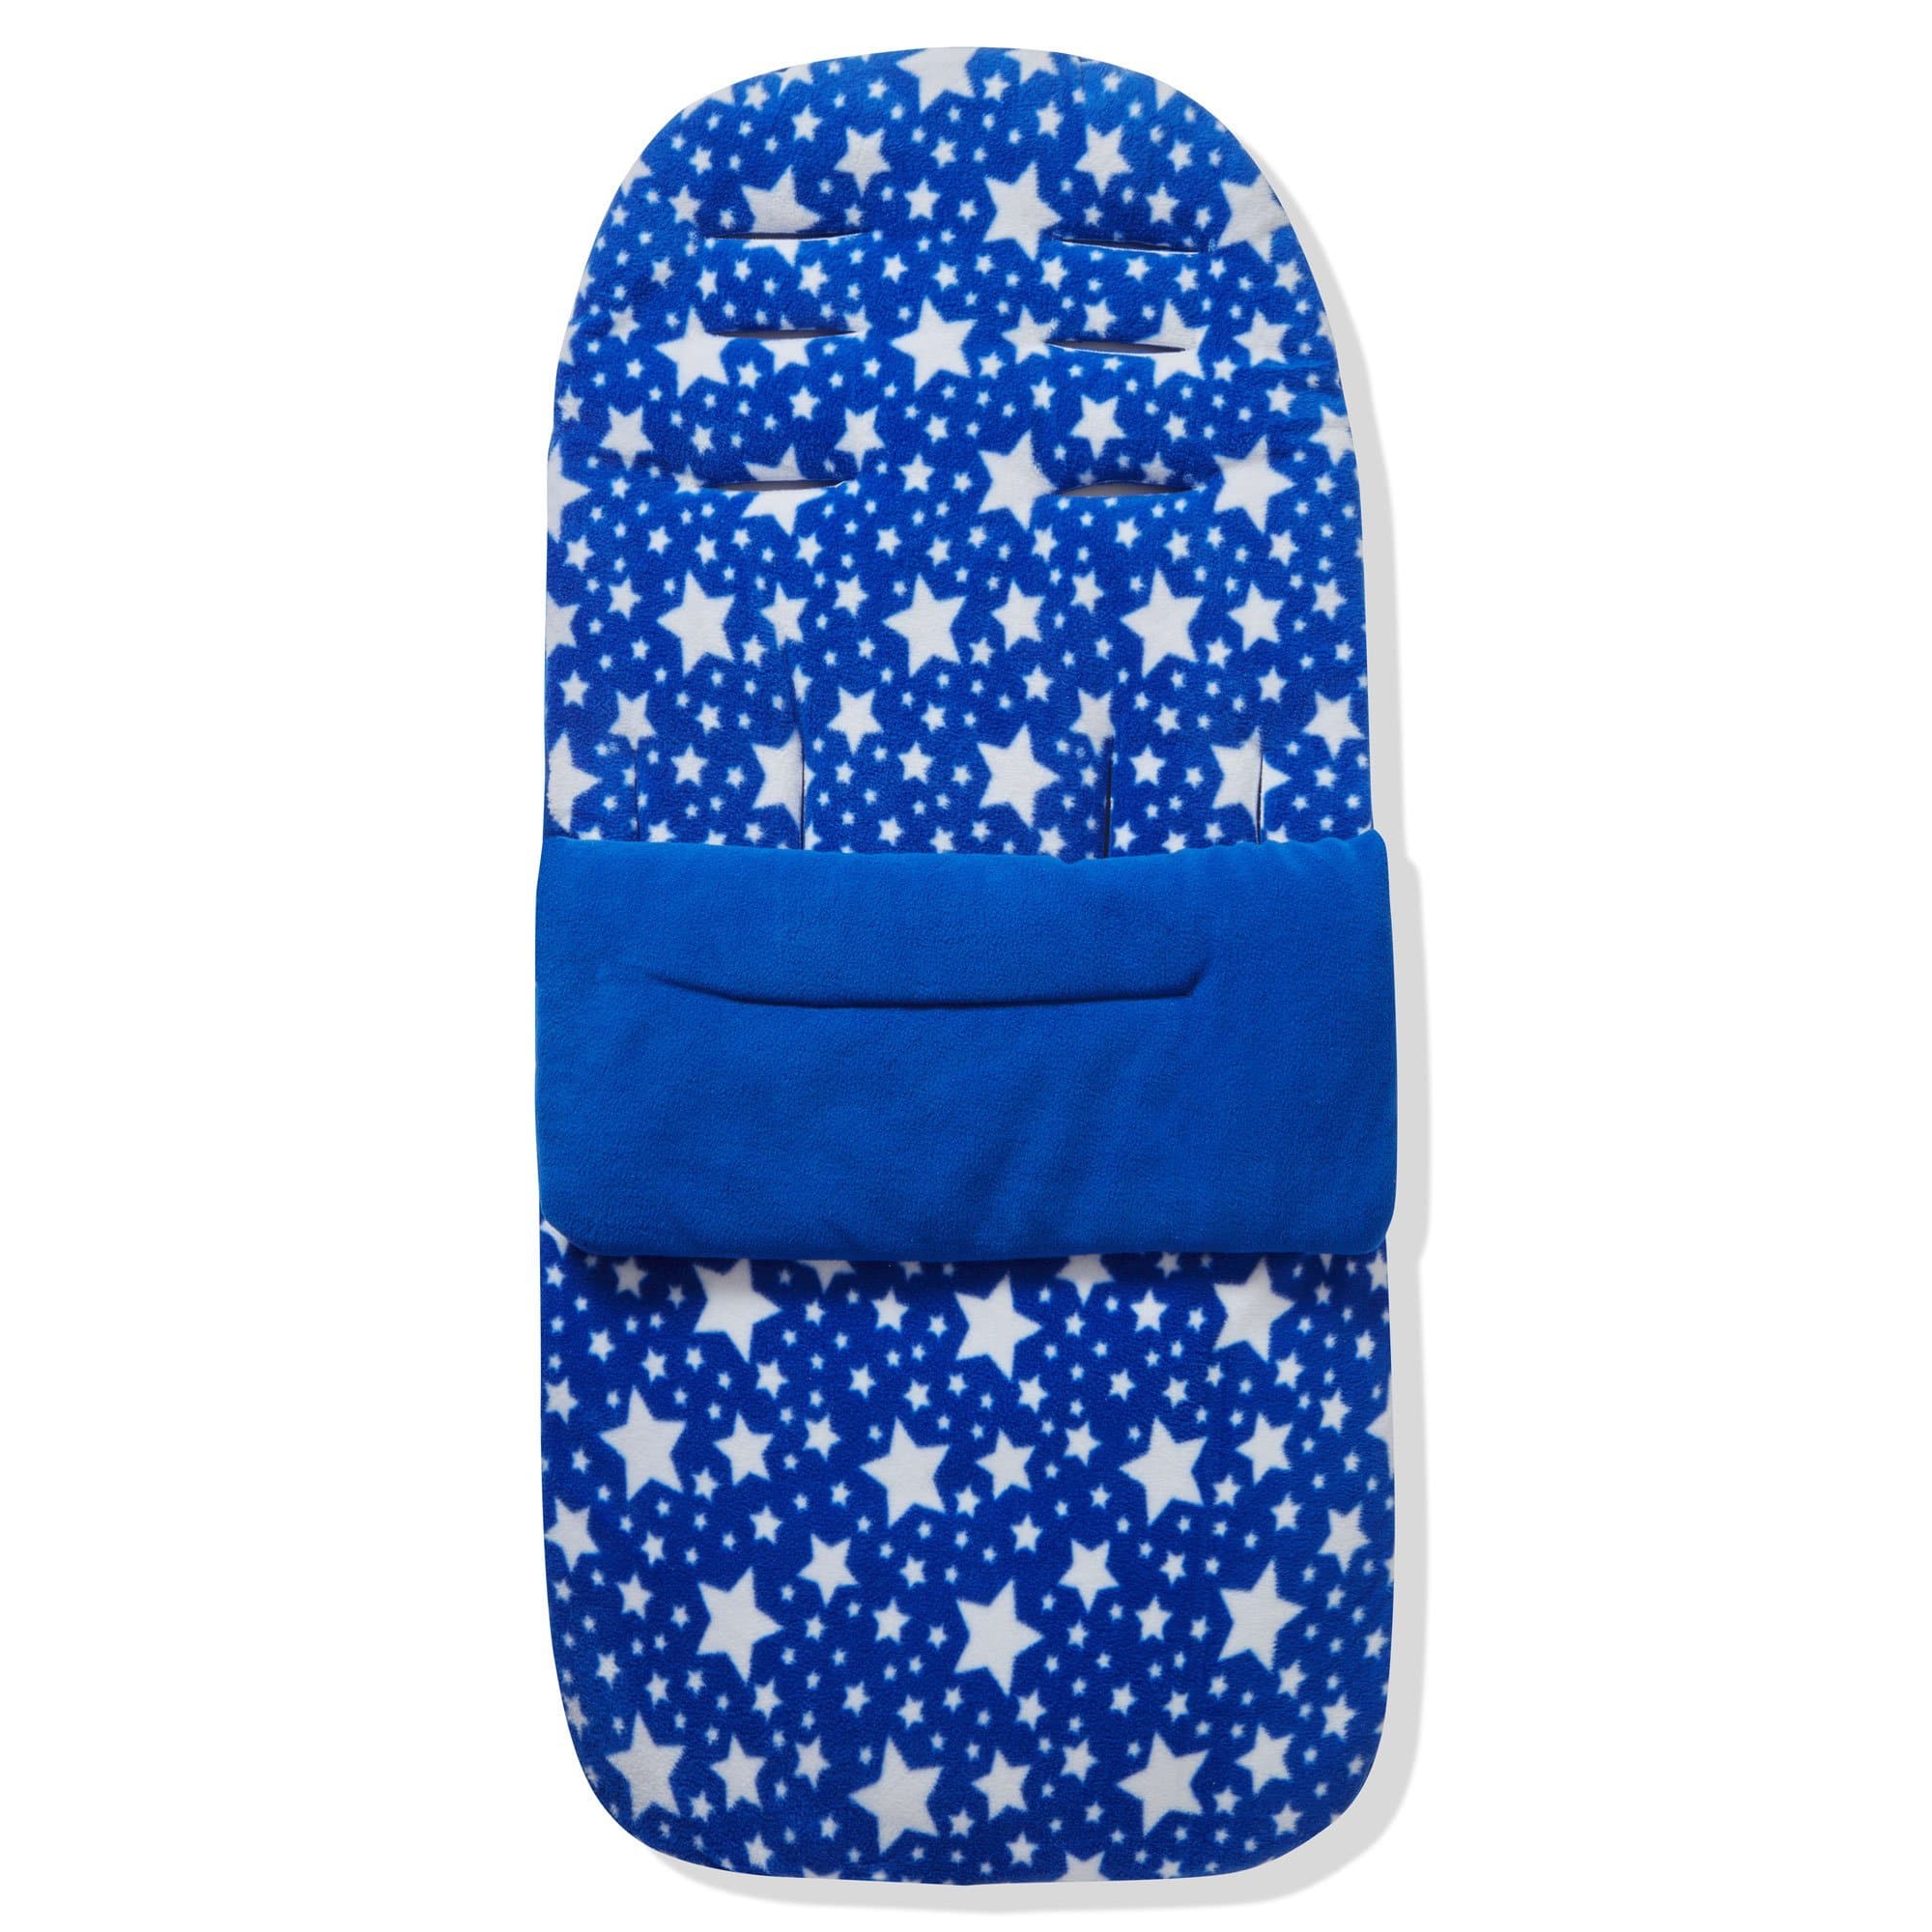 Fleece Footmuff / Cosy Toes Compatible with I'coo - Blue Star / Fits All Models | For Your Little One